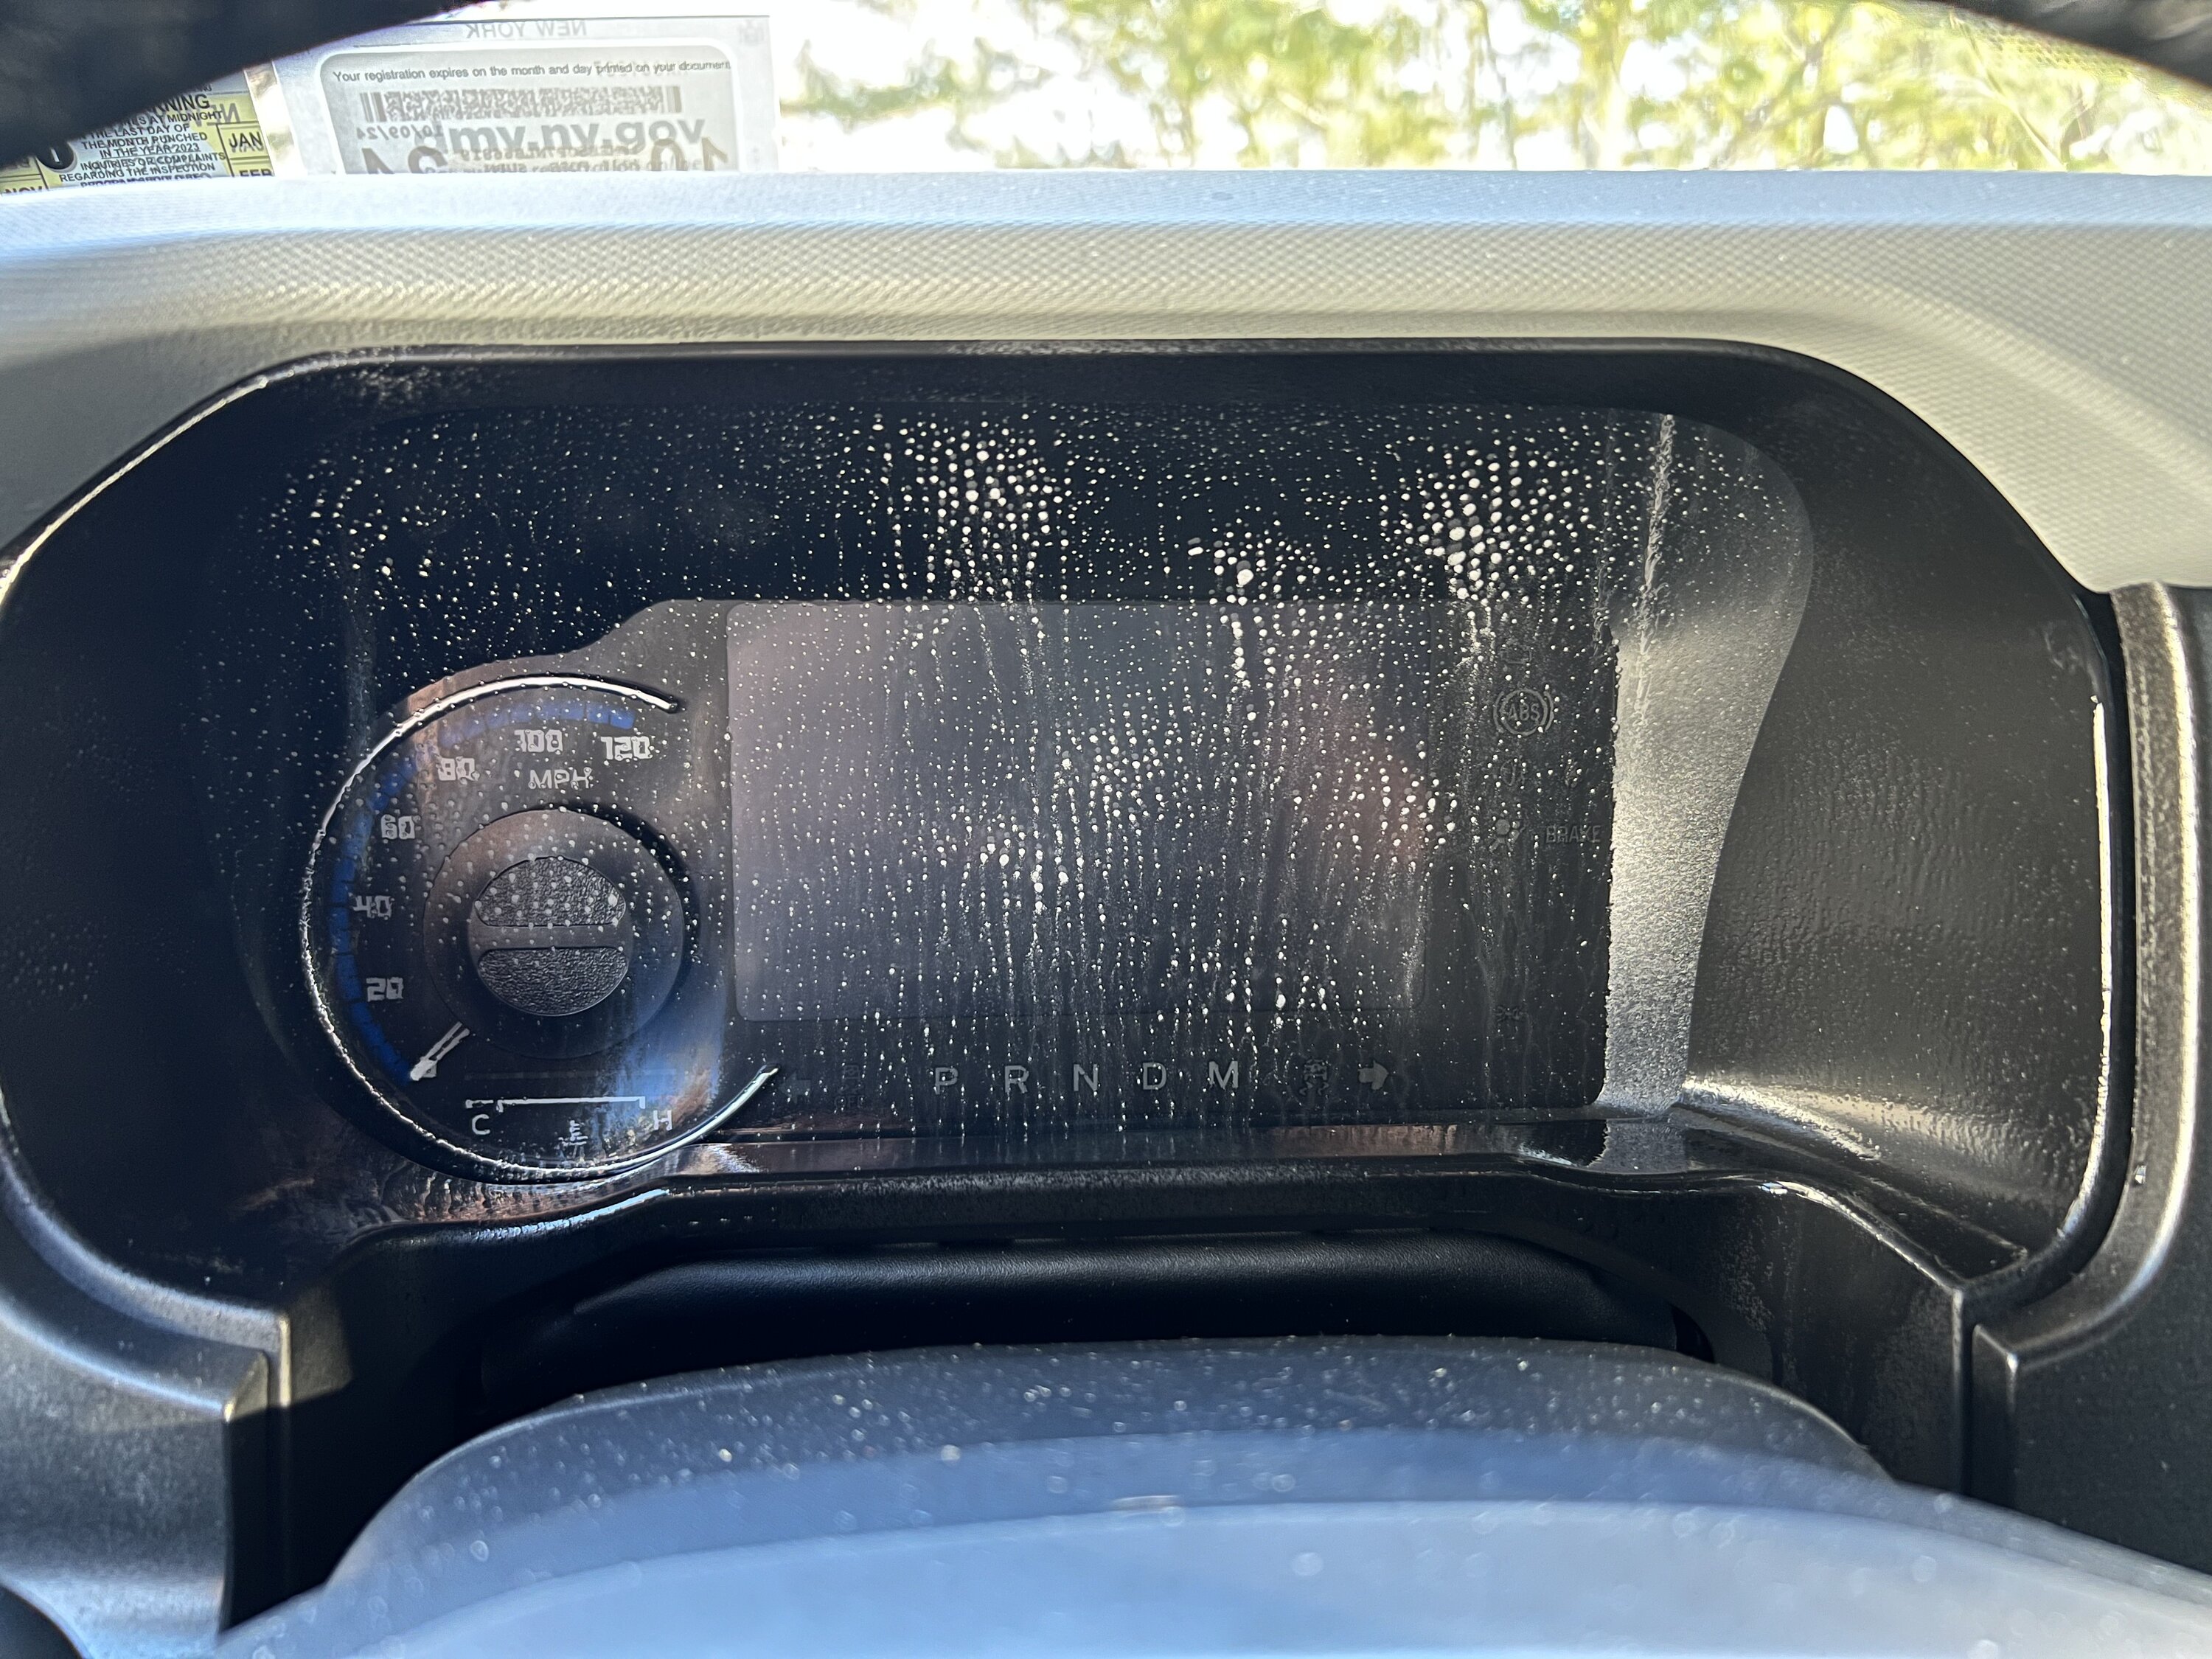 Ford Bronco Screen ProTech display screen & gauge cluster protection film - installation & review 5450F399-37FF-49BD-ADCD-1807854FC229